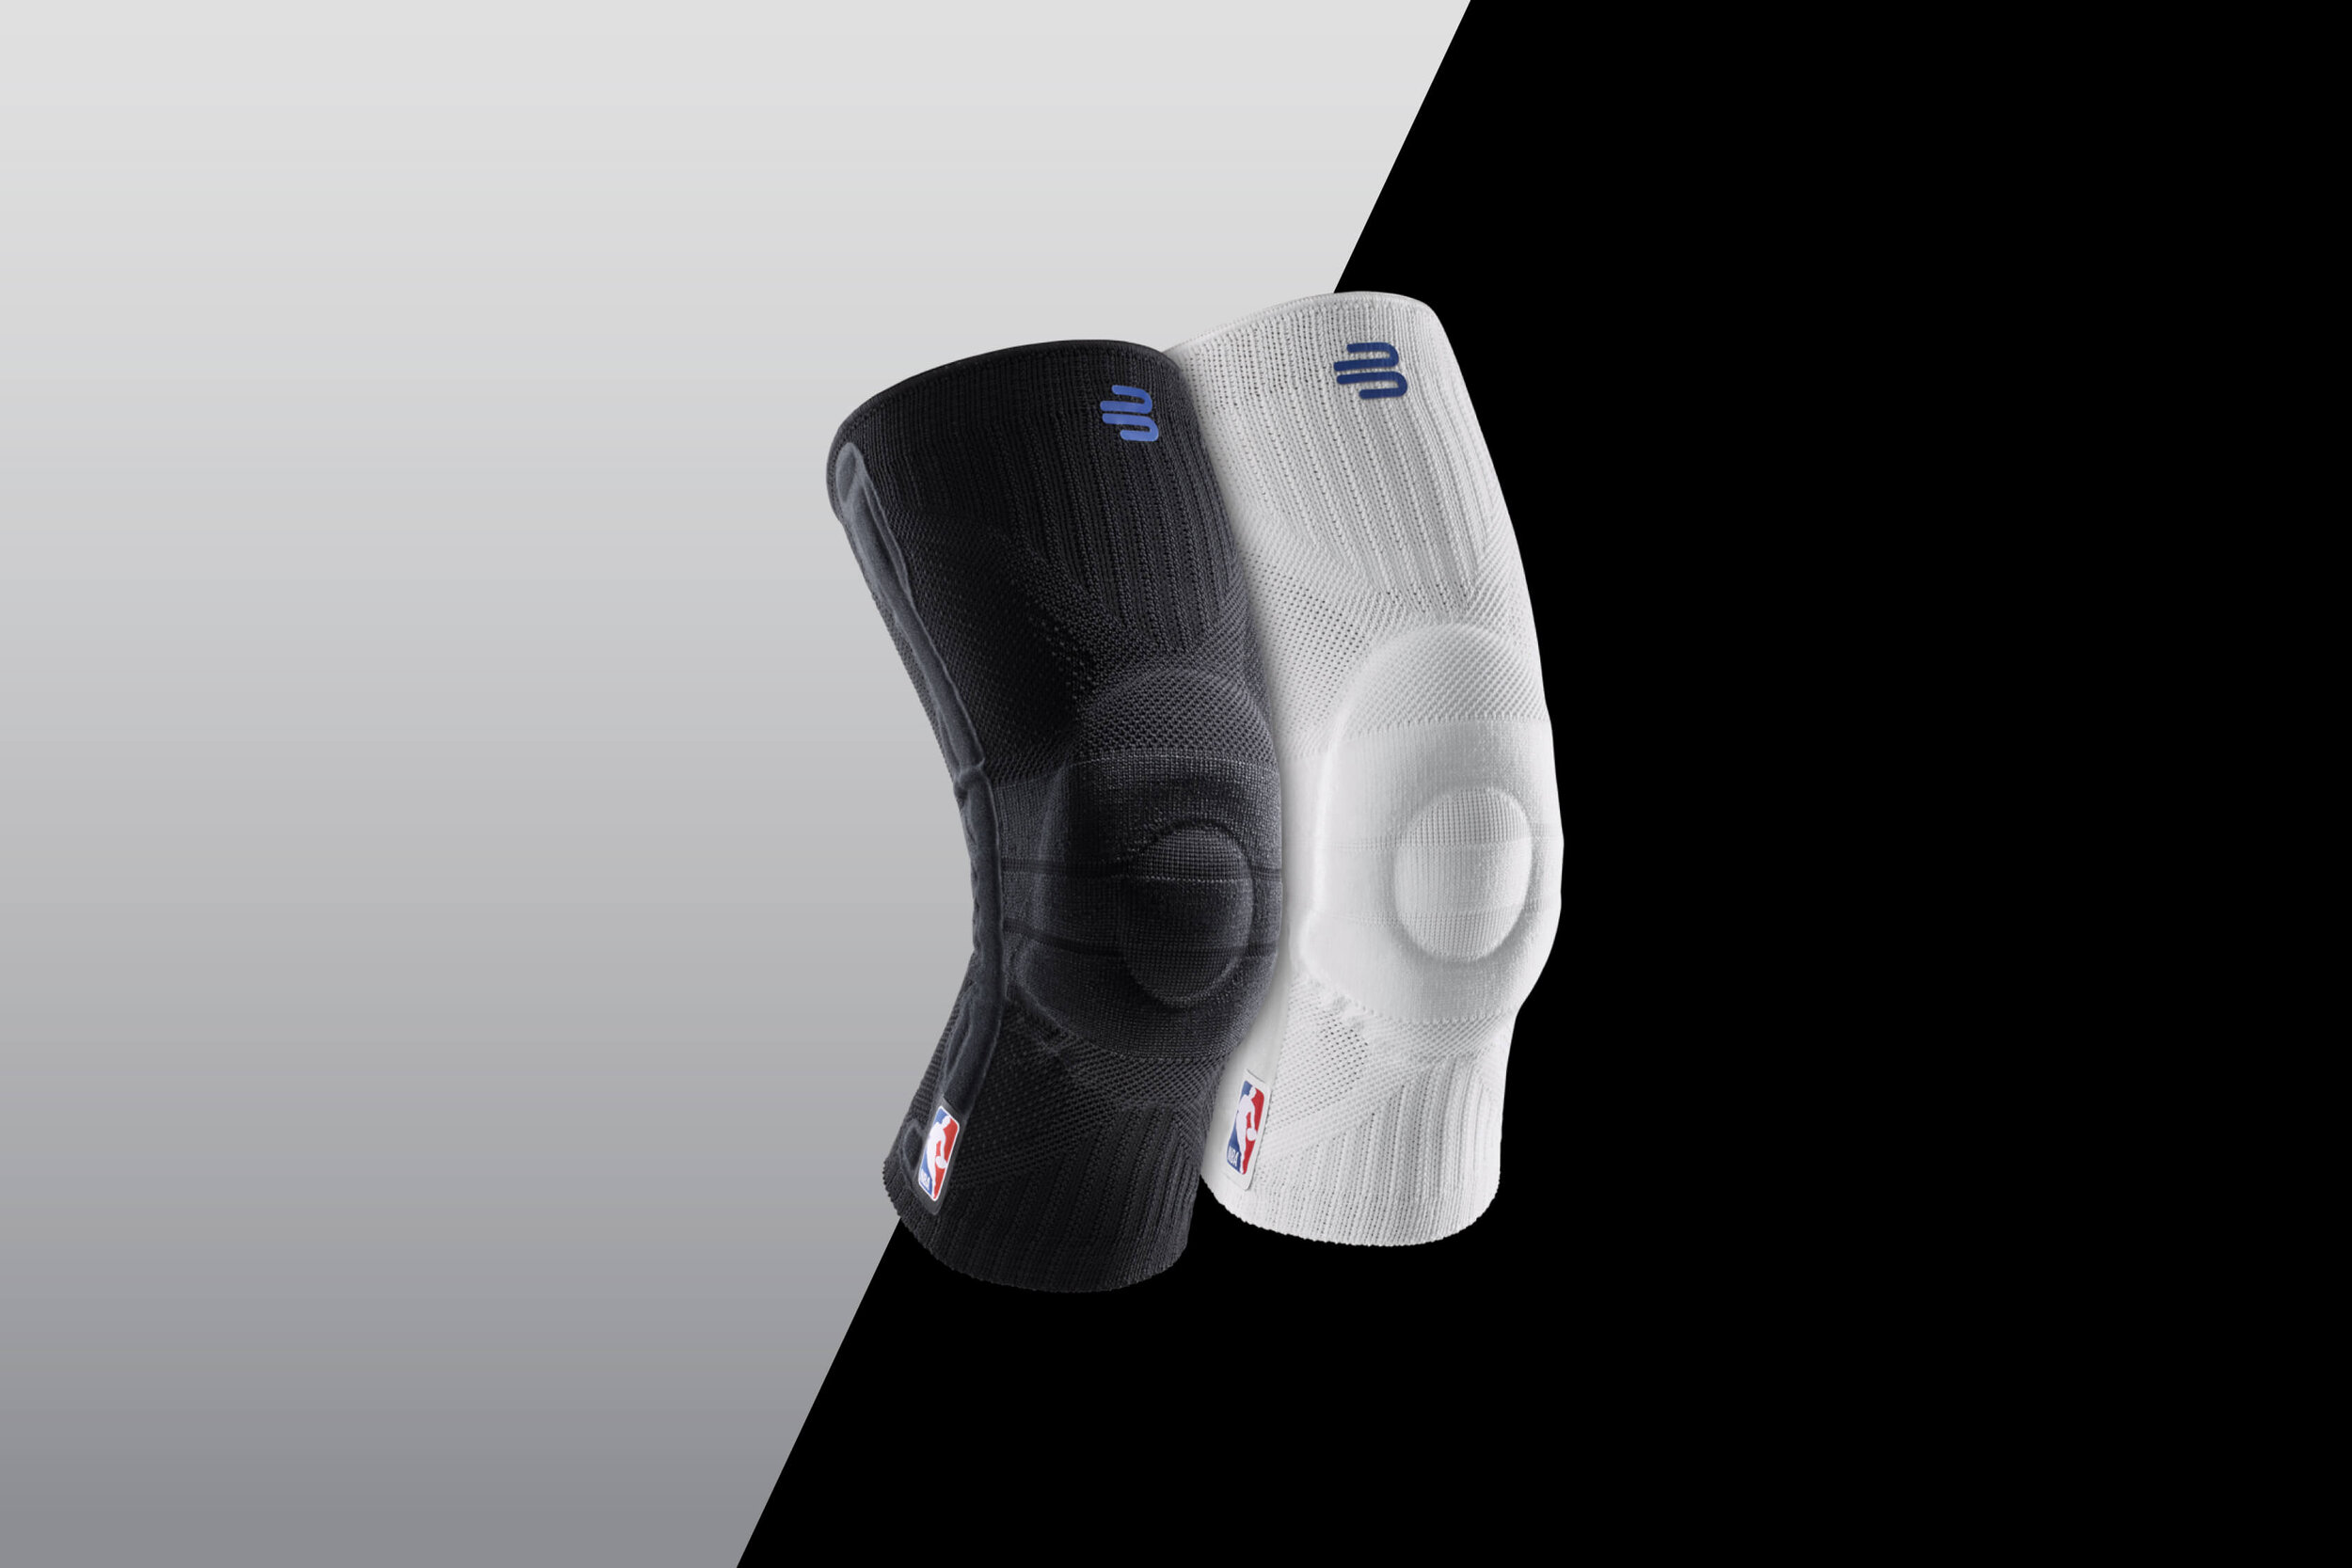 Official Knee Support of the NBA